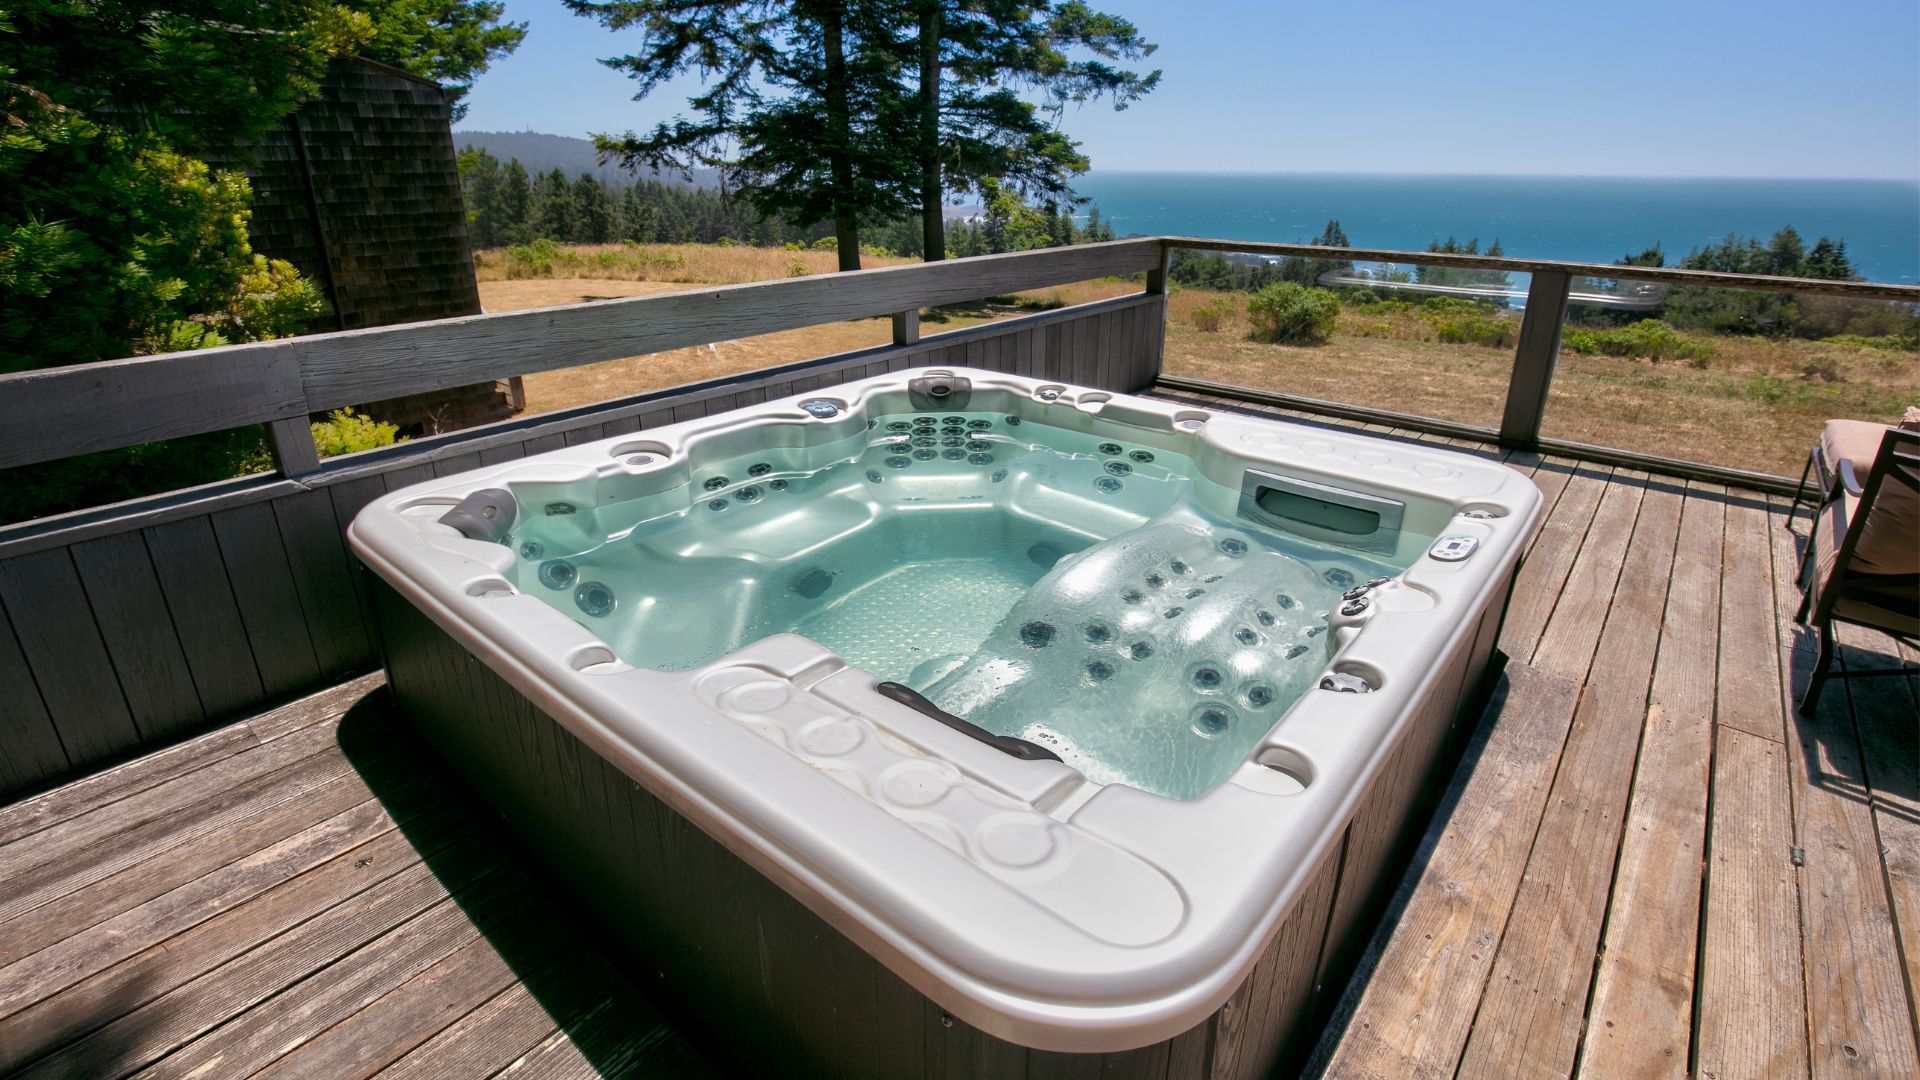 Hot tub on an aged wooden deck overlooking a tranquil sea view, surrounded by nature in Chula Vista.